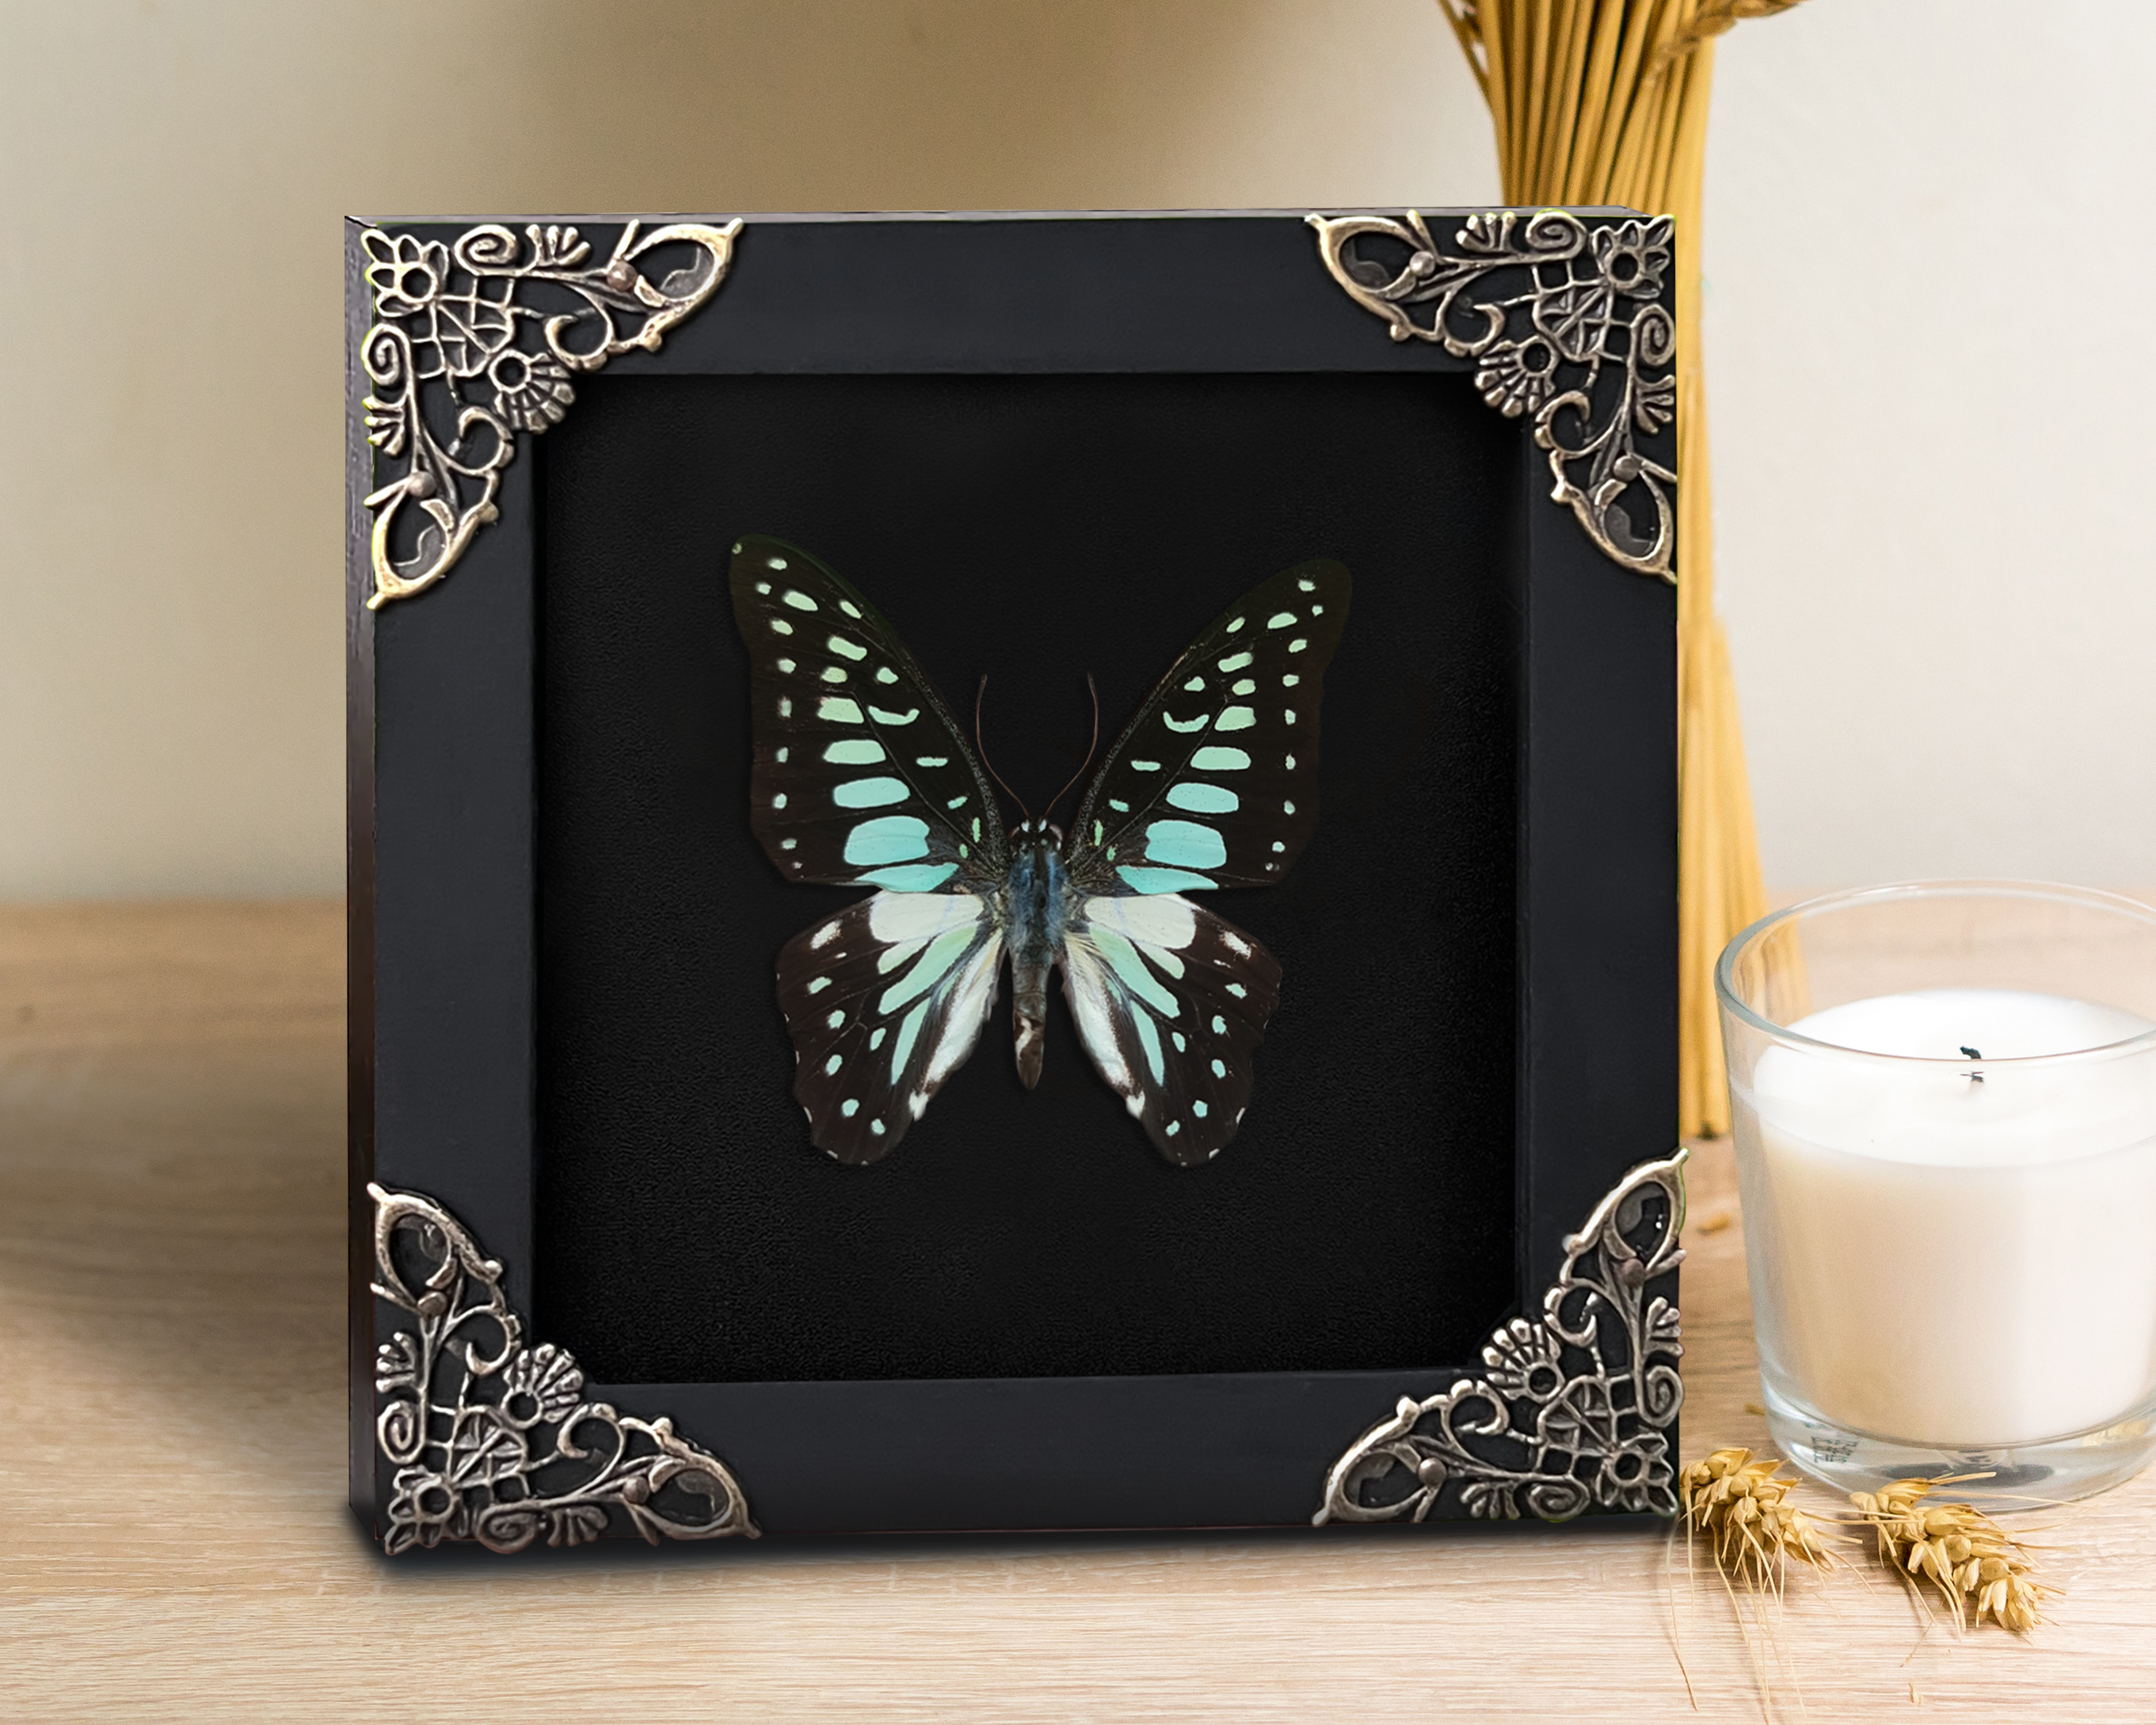 Real Framed Butterfly Taxidermy Dead Dried Insect Specimens Taxidermy K12-11-DE